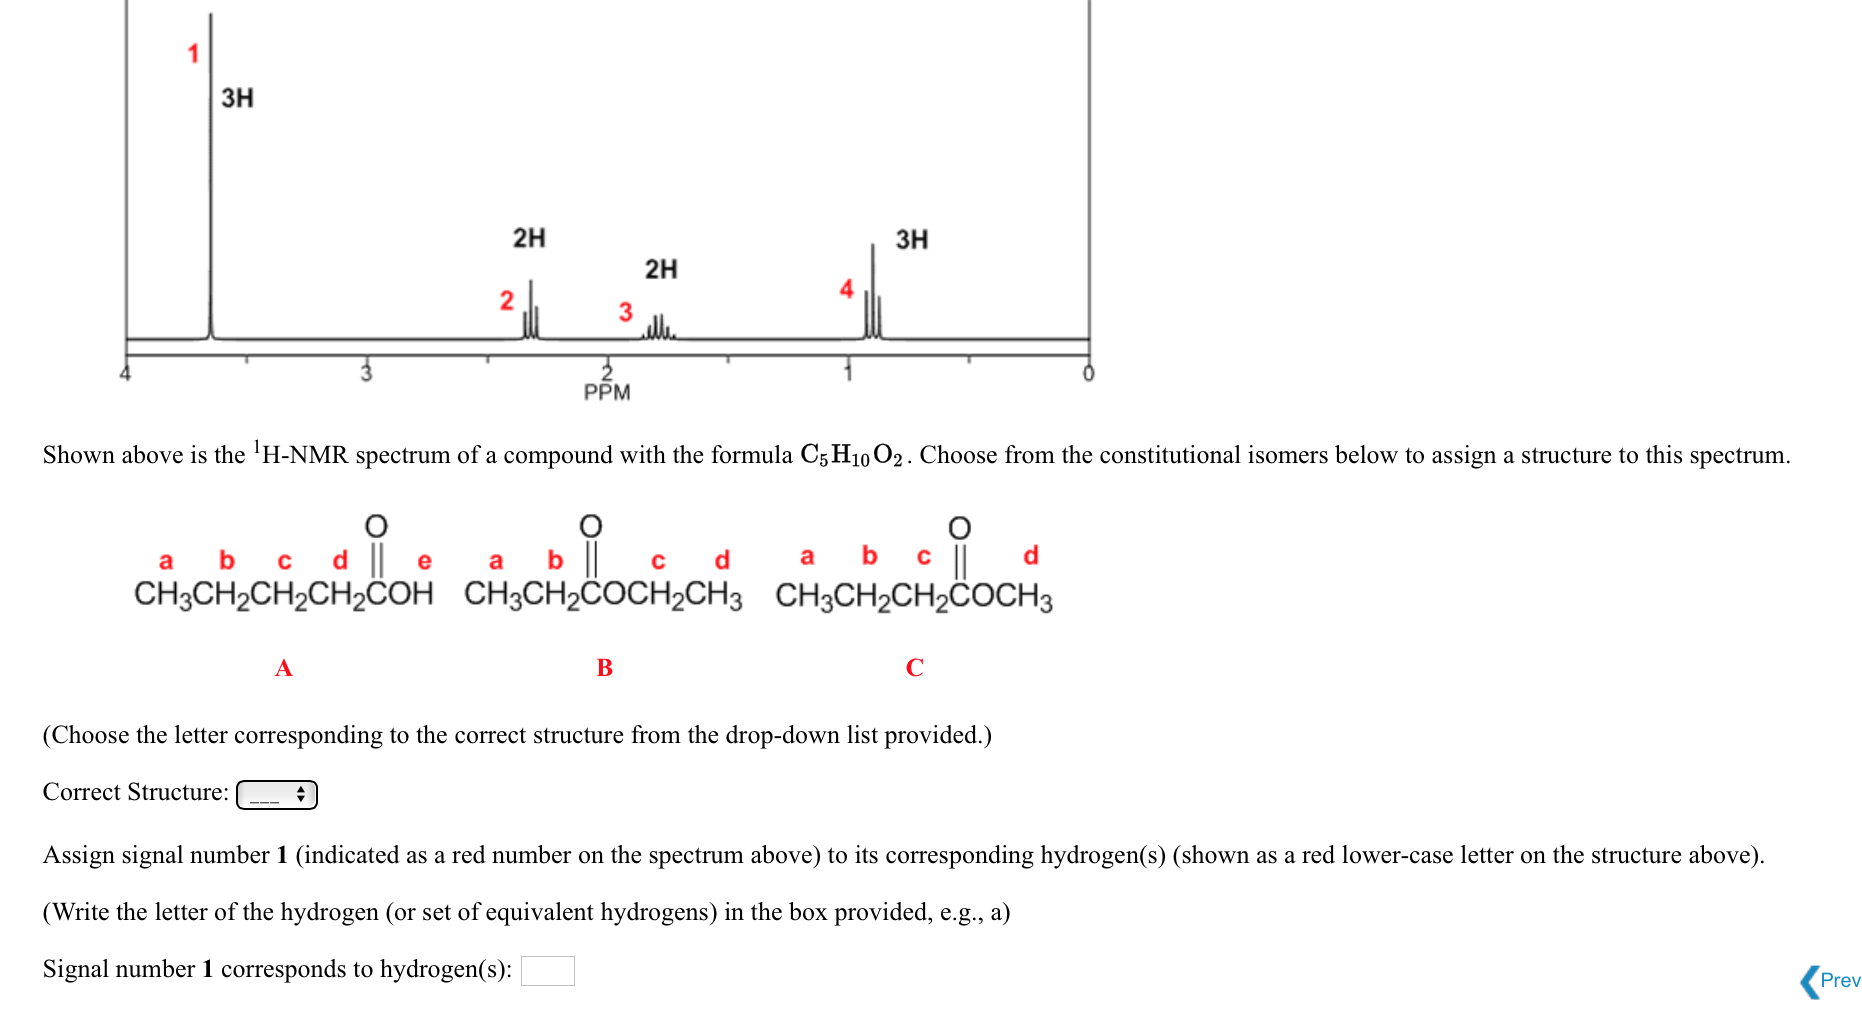 Solved: Shown Above Is The 1H-NMR Spectrum Of A Compound W... | Chegg.com